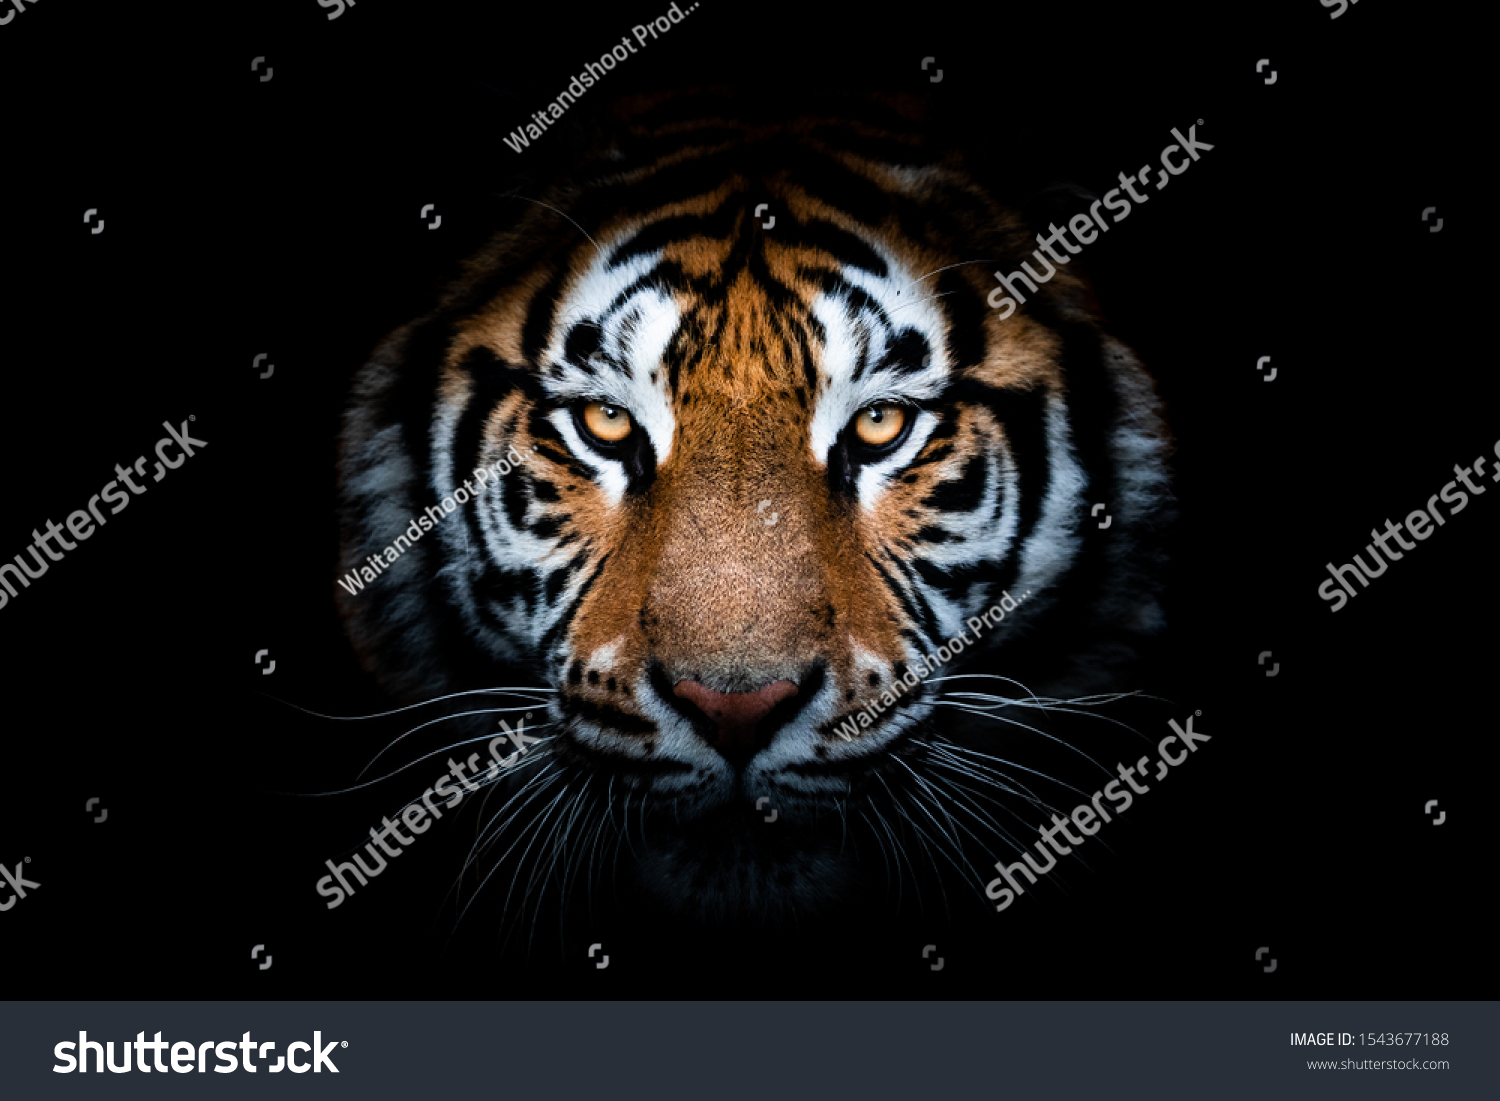 local image of tiger for hw2a